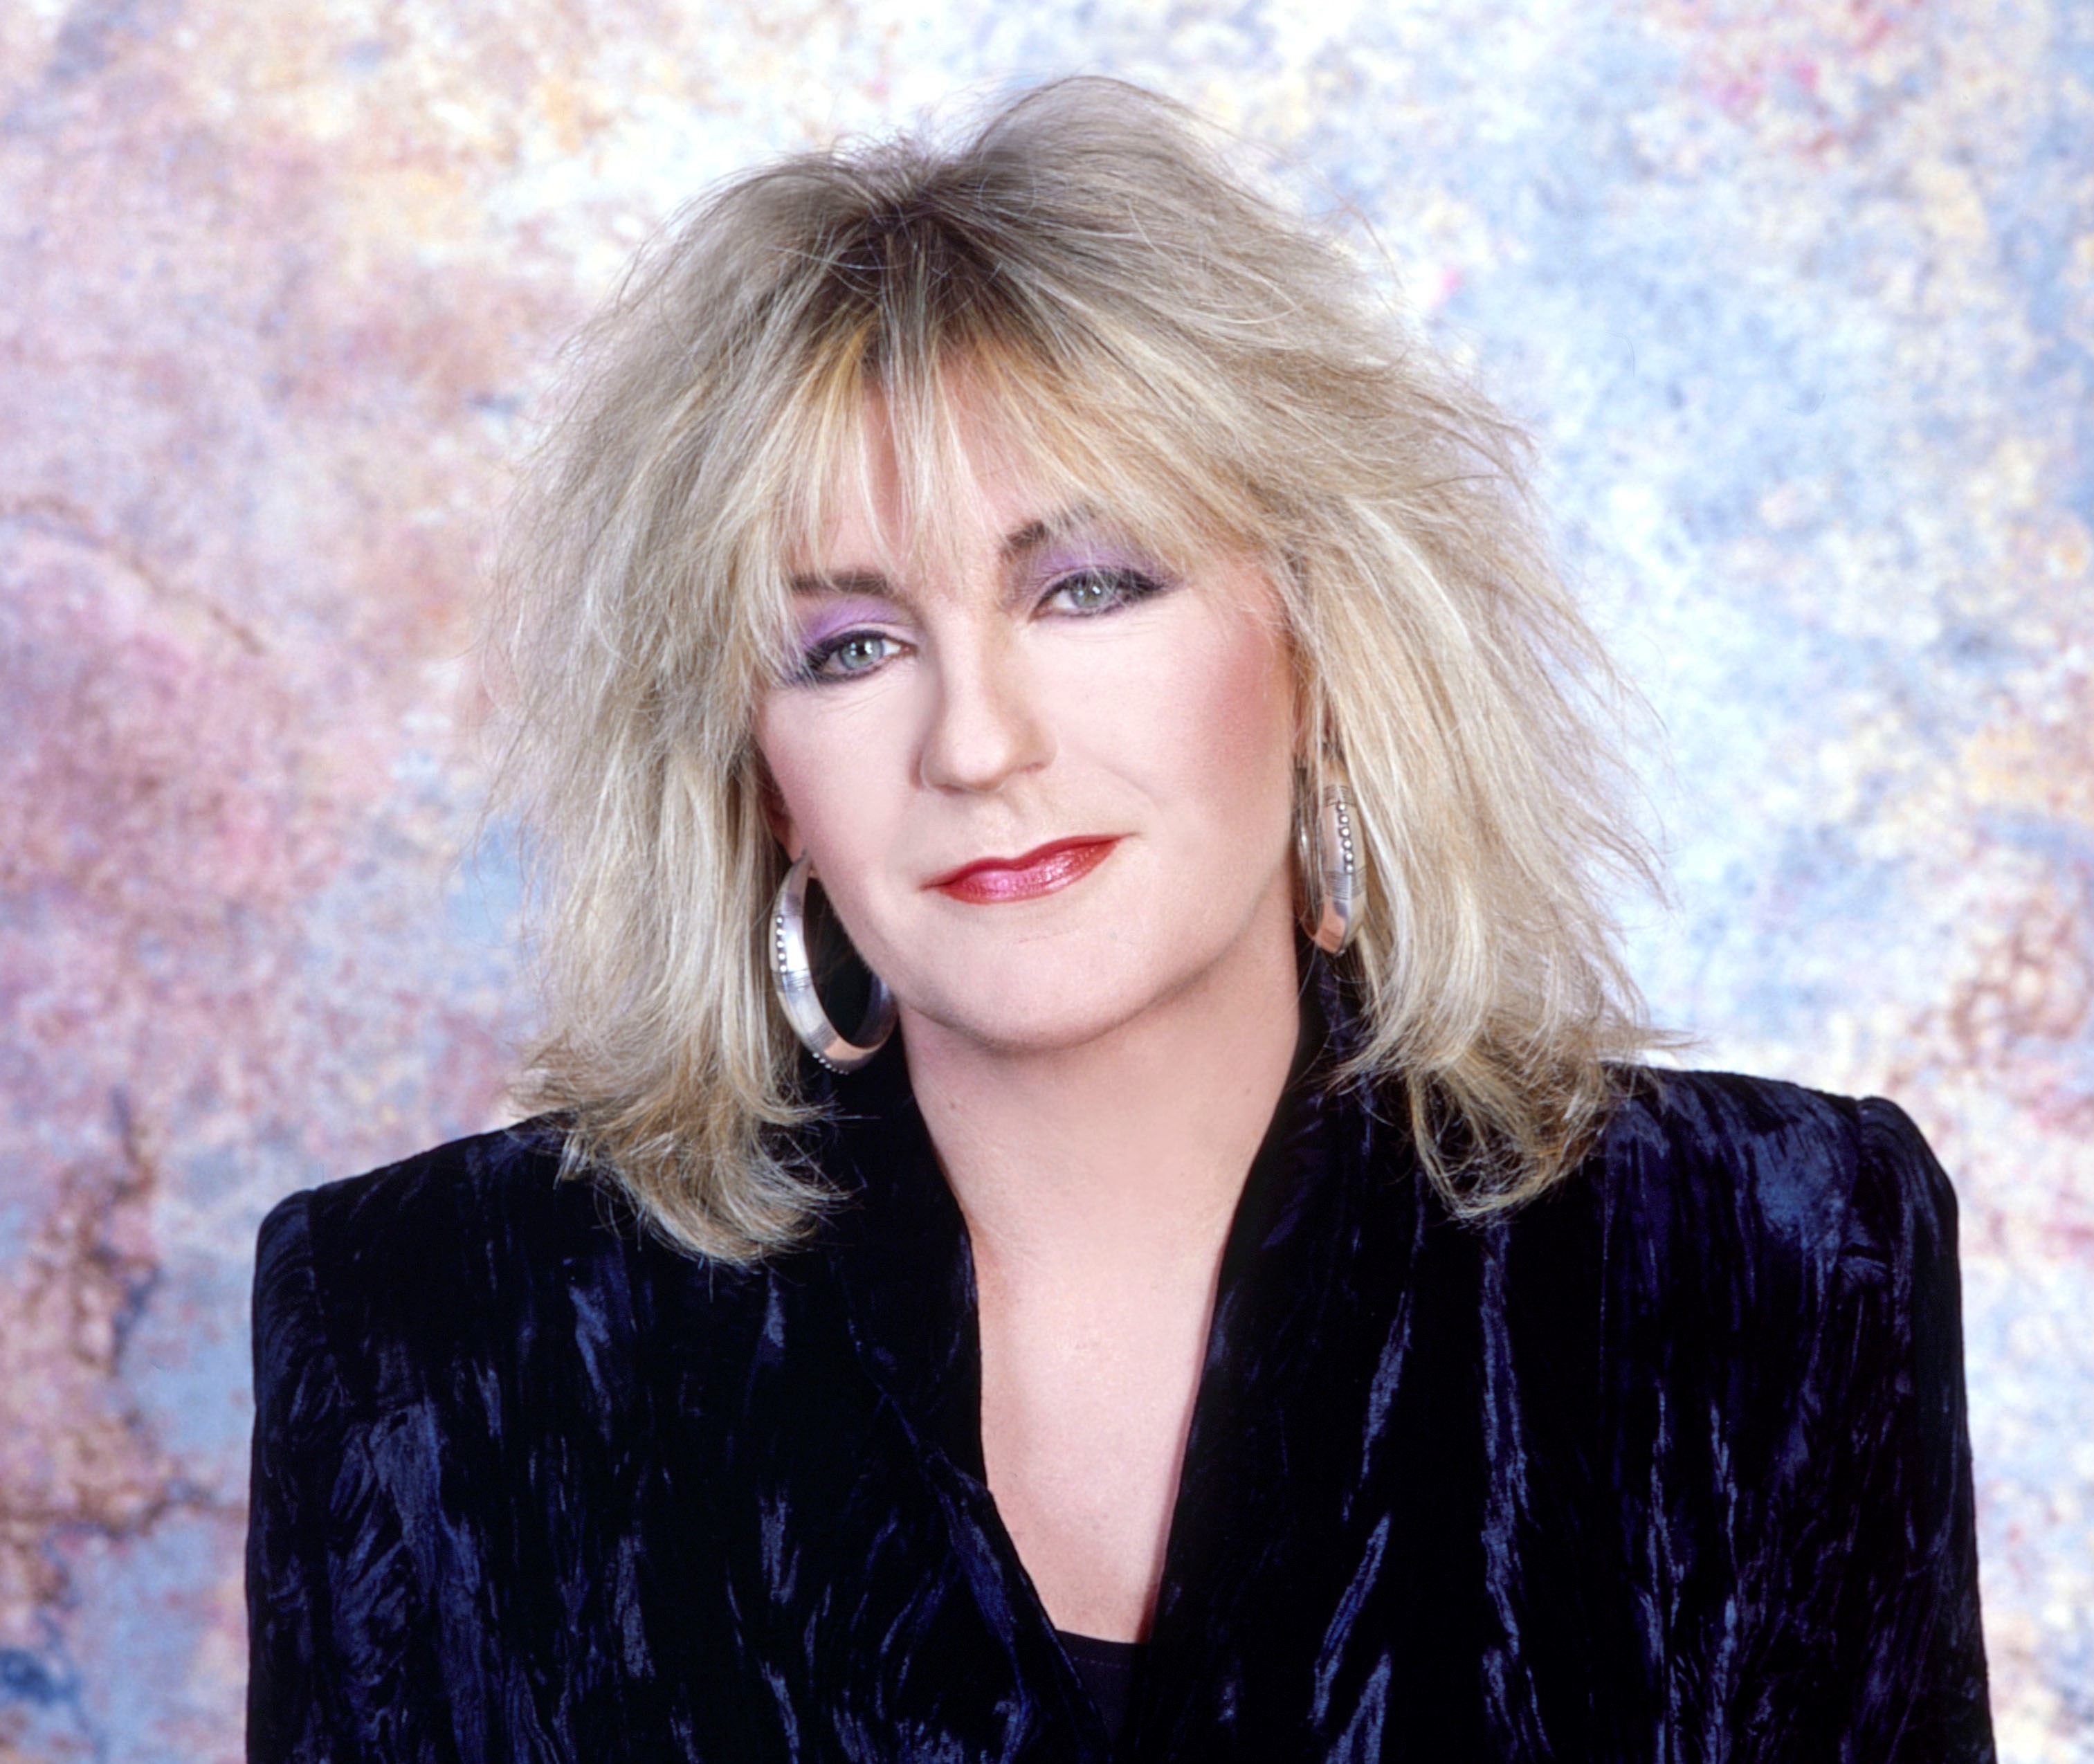 Christine McVie wears a black shirt and silver earrings against a multicolored background.